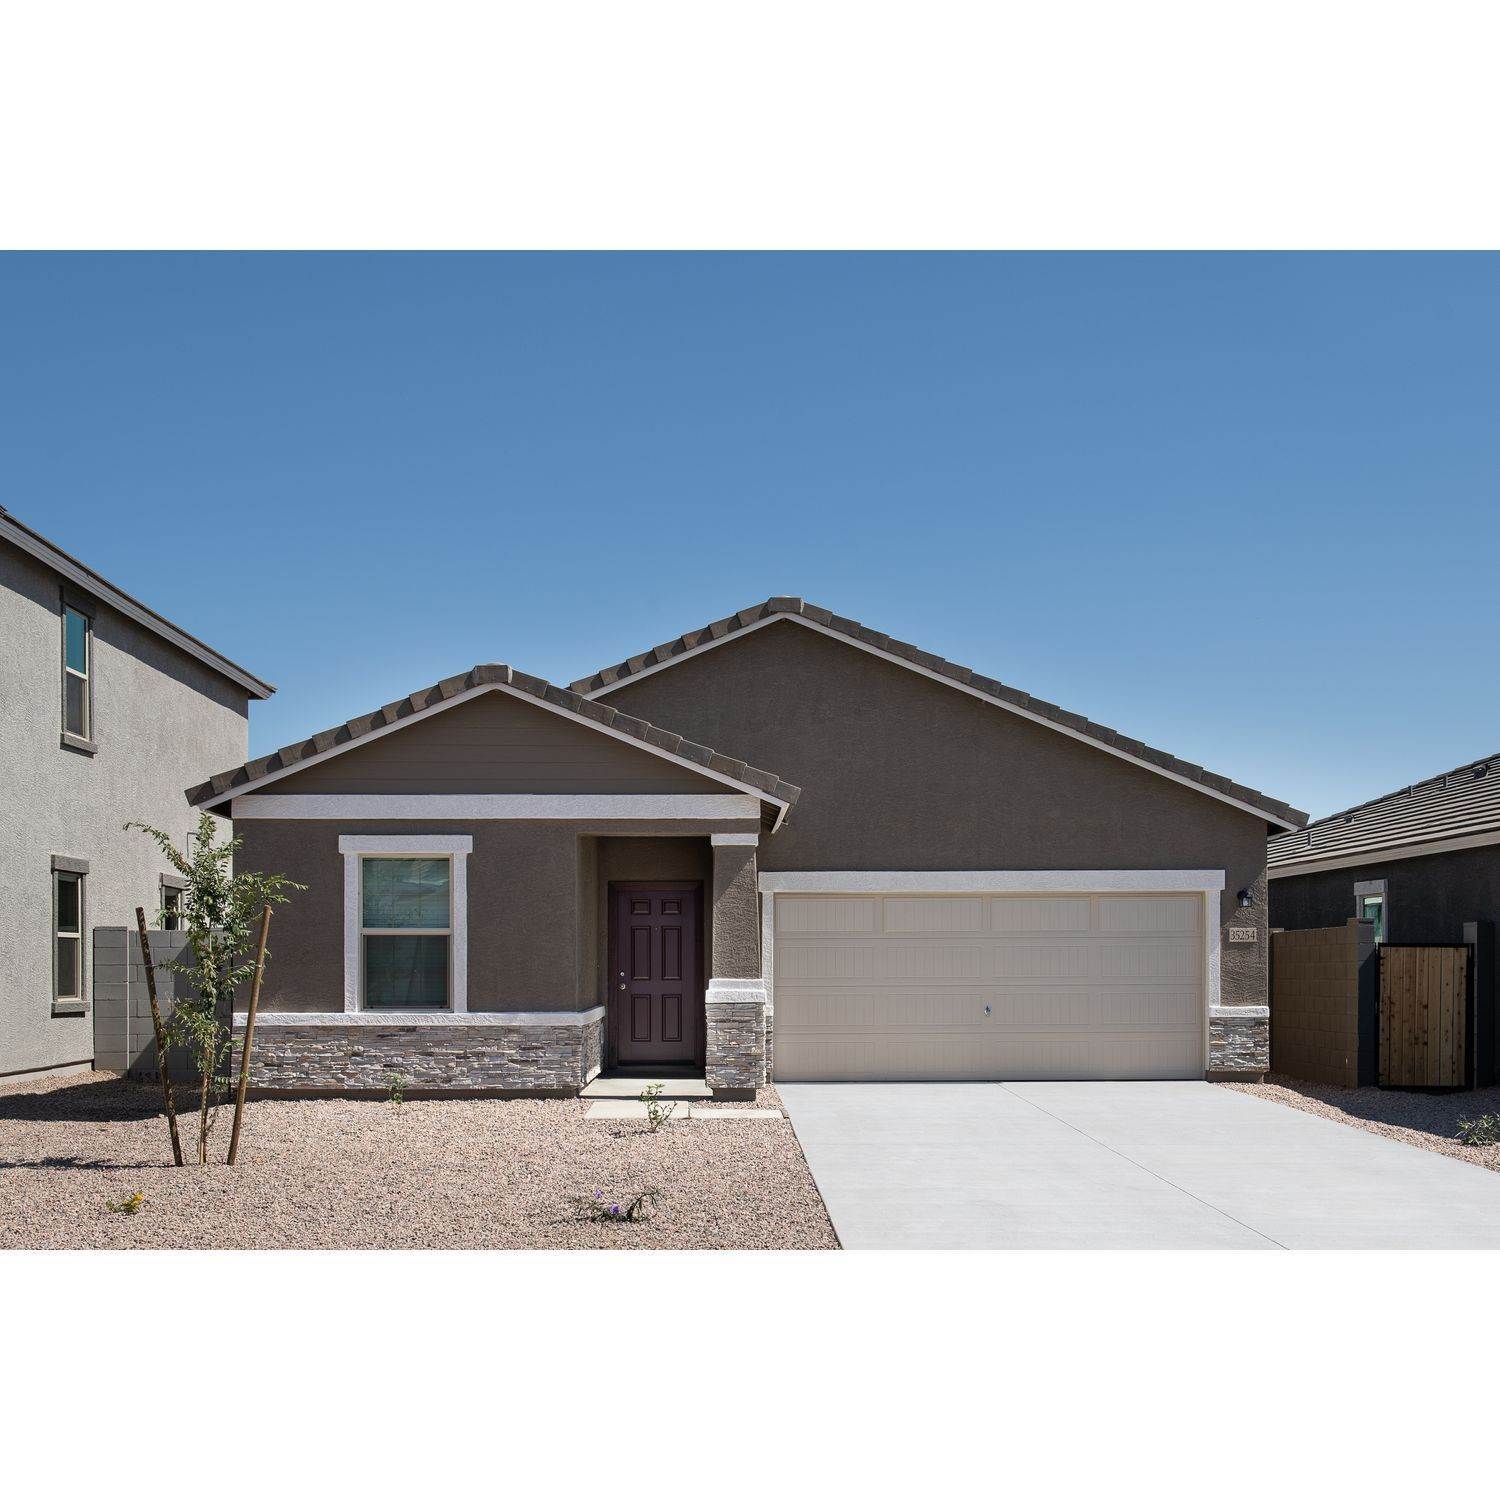 2. Villages at Accomazzo building at 3649 S. 98th Glen, Tolleson, AZ 85353